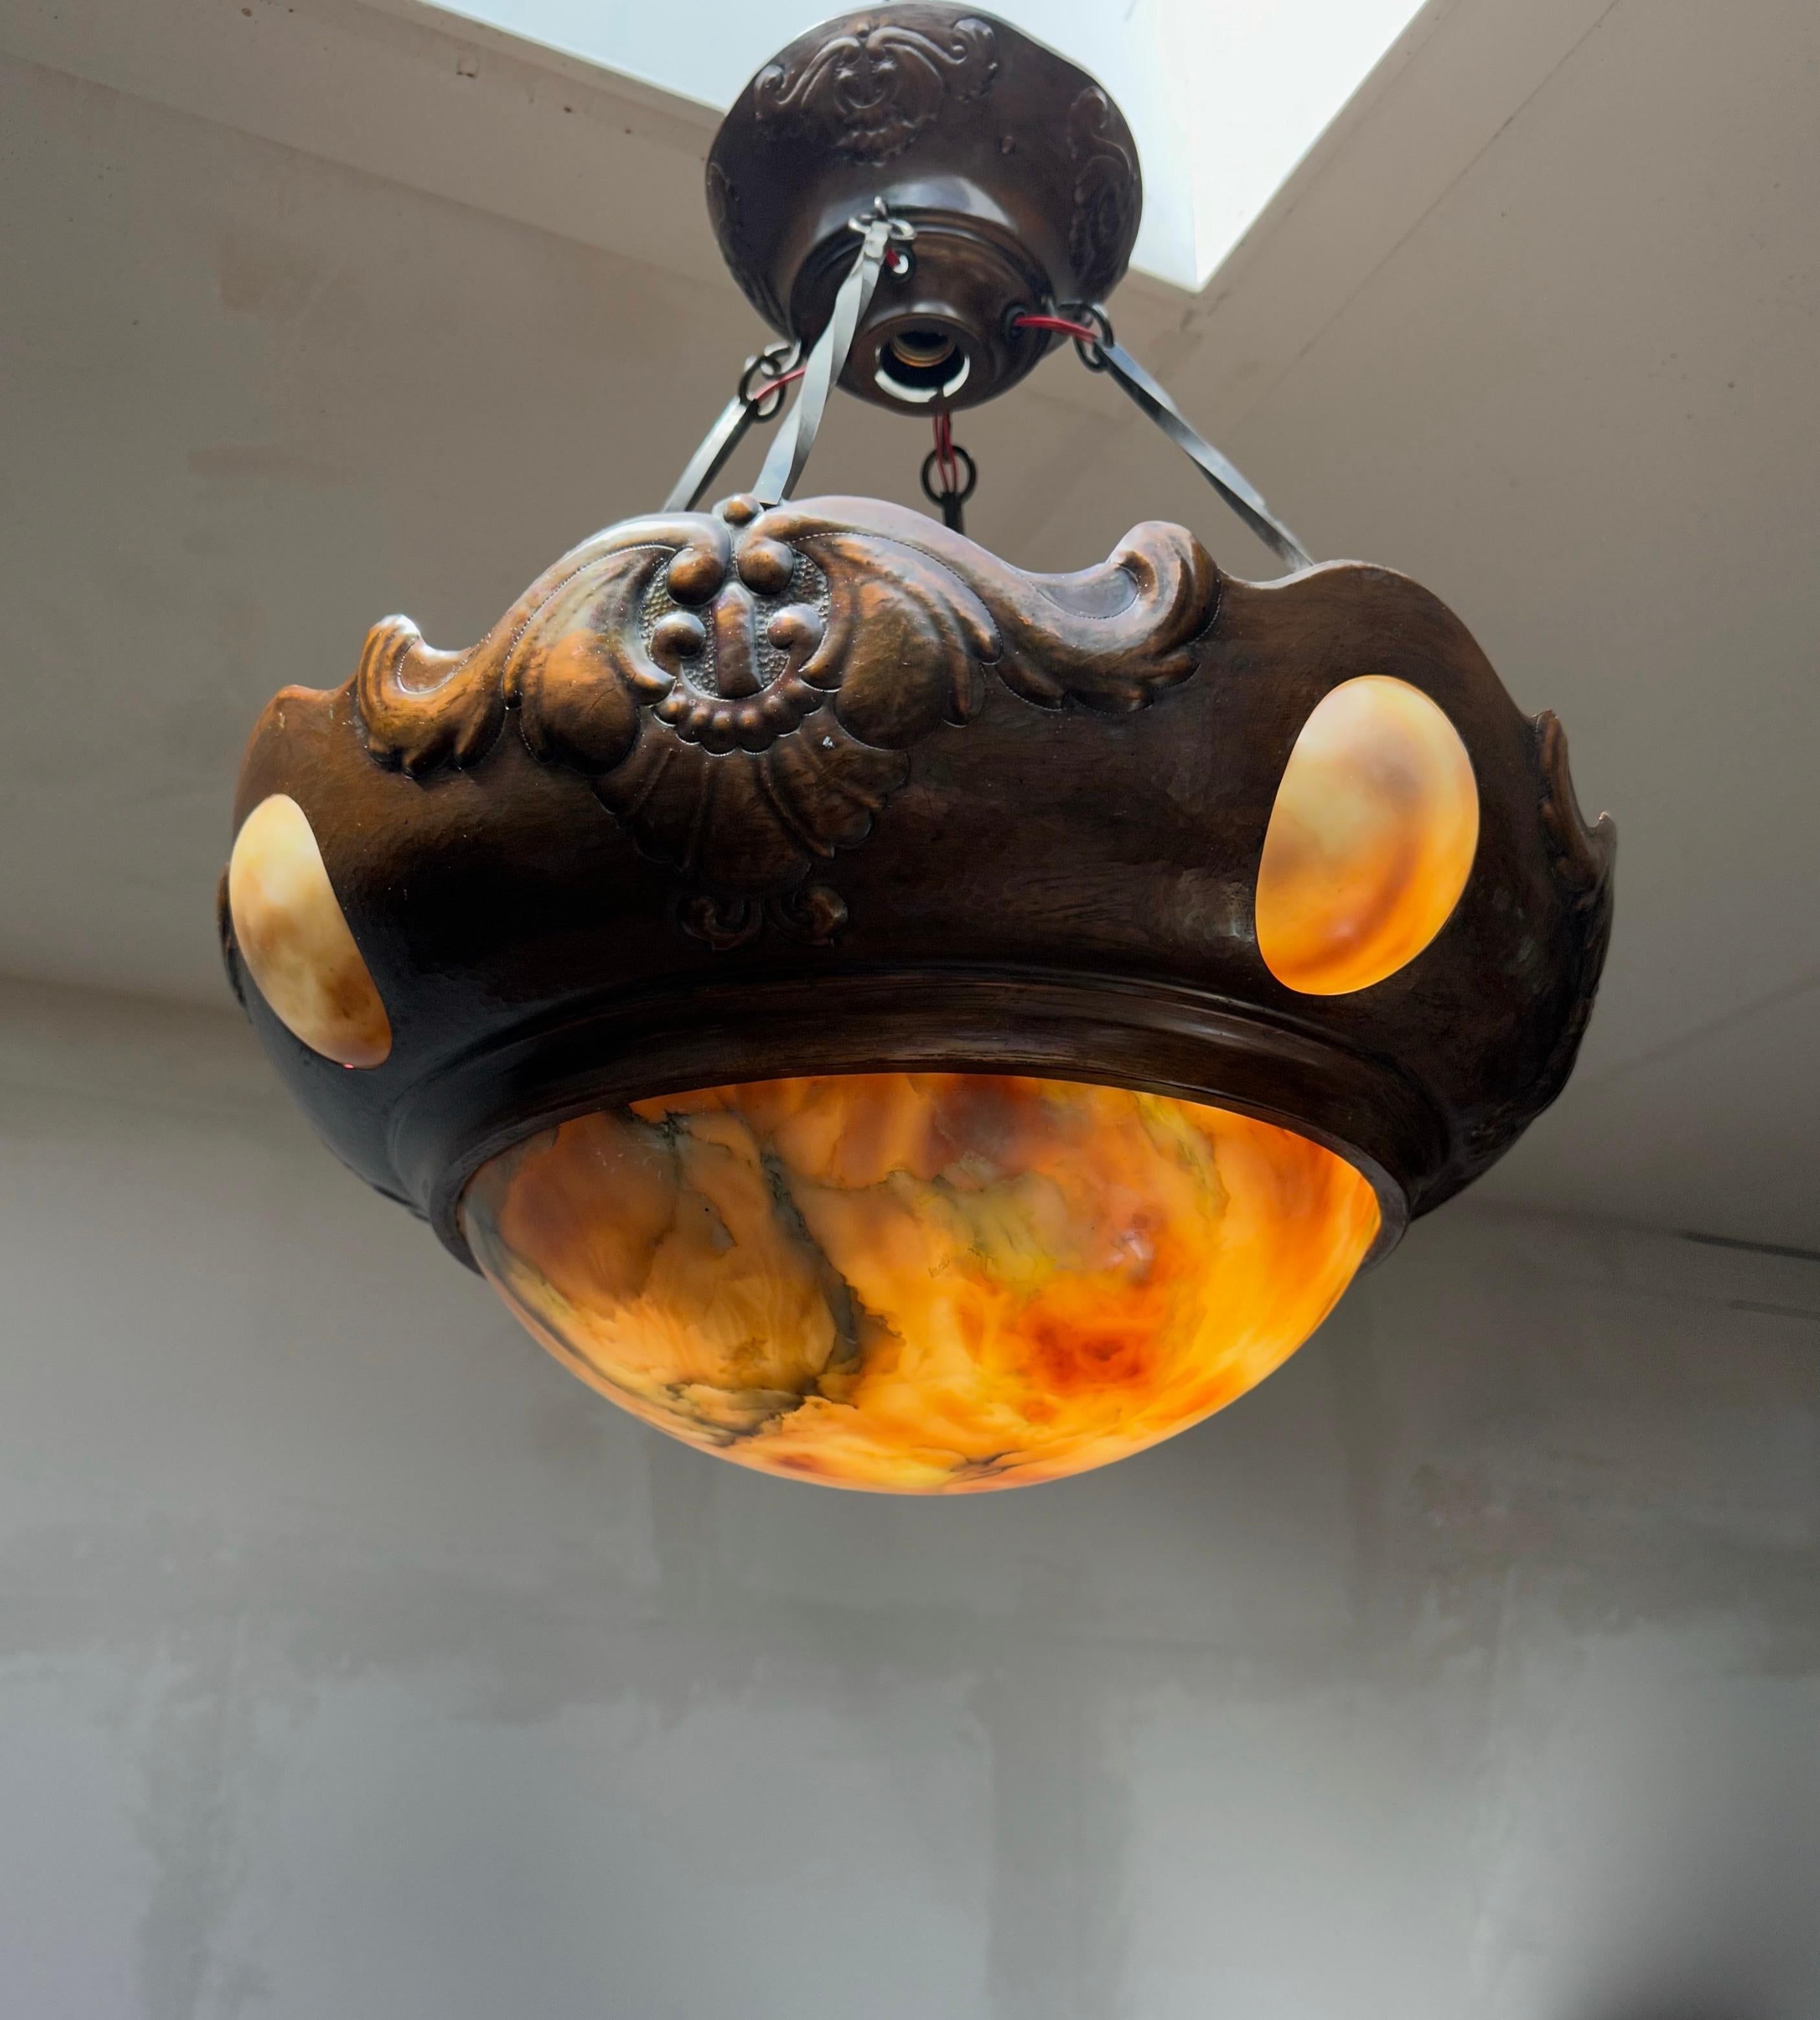 Copper and alabaster Arts & Crafts chandelier with original twirled copper 'chain' & original canopy.

With early 20th century lighting being one of our specialities, finding this rare and extraordinary pendant more than made our day. The